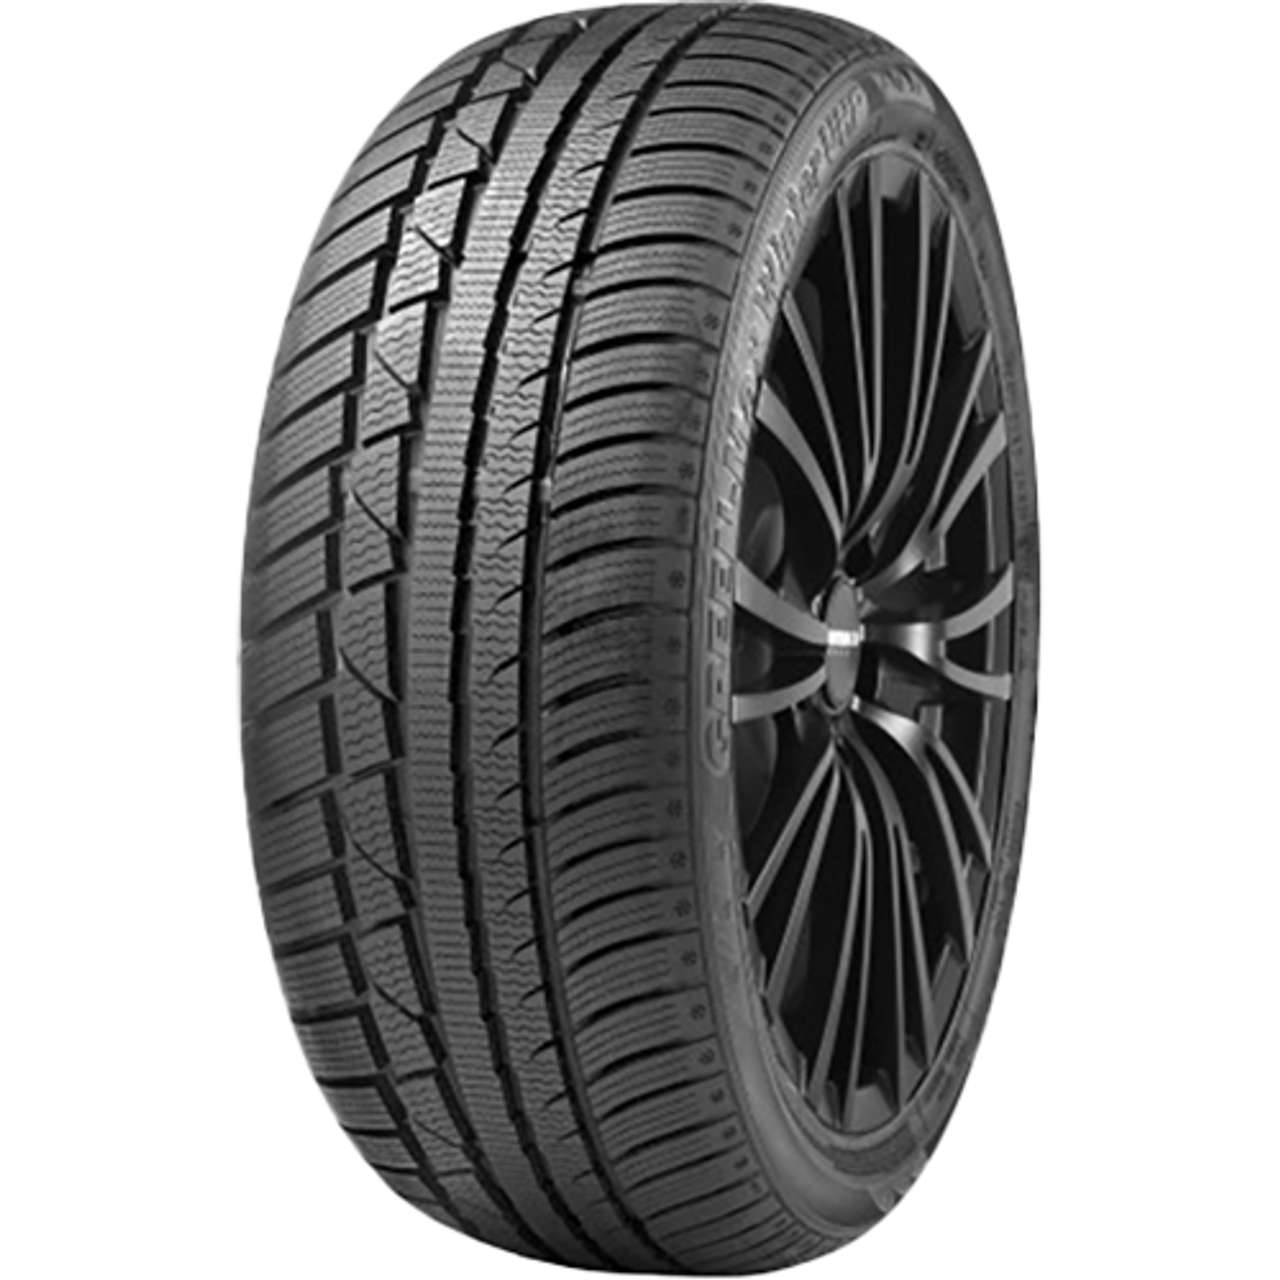 LINGLONG GREEN-MAX WINTER UHP 235/45R18 98V MFS BSW von LINGLONG